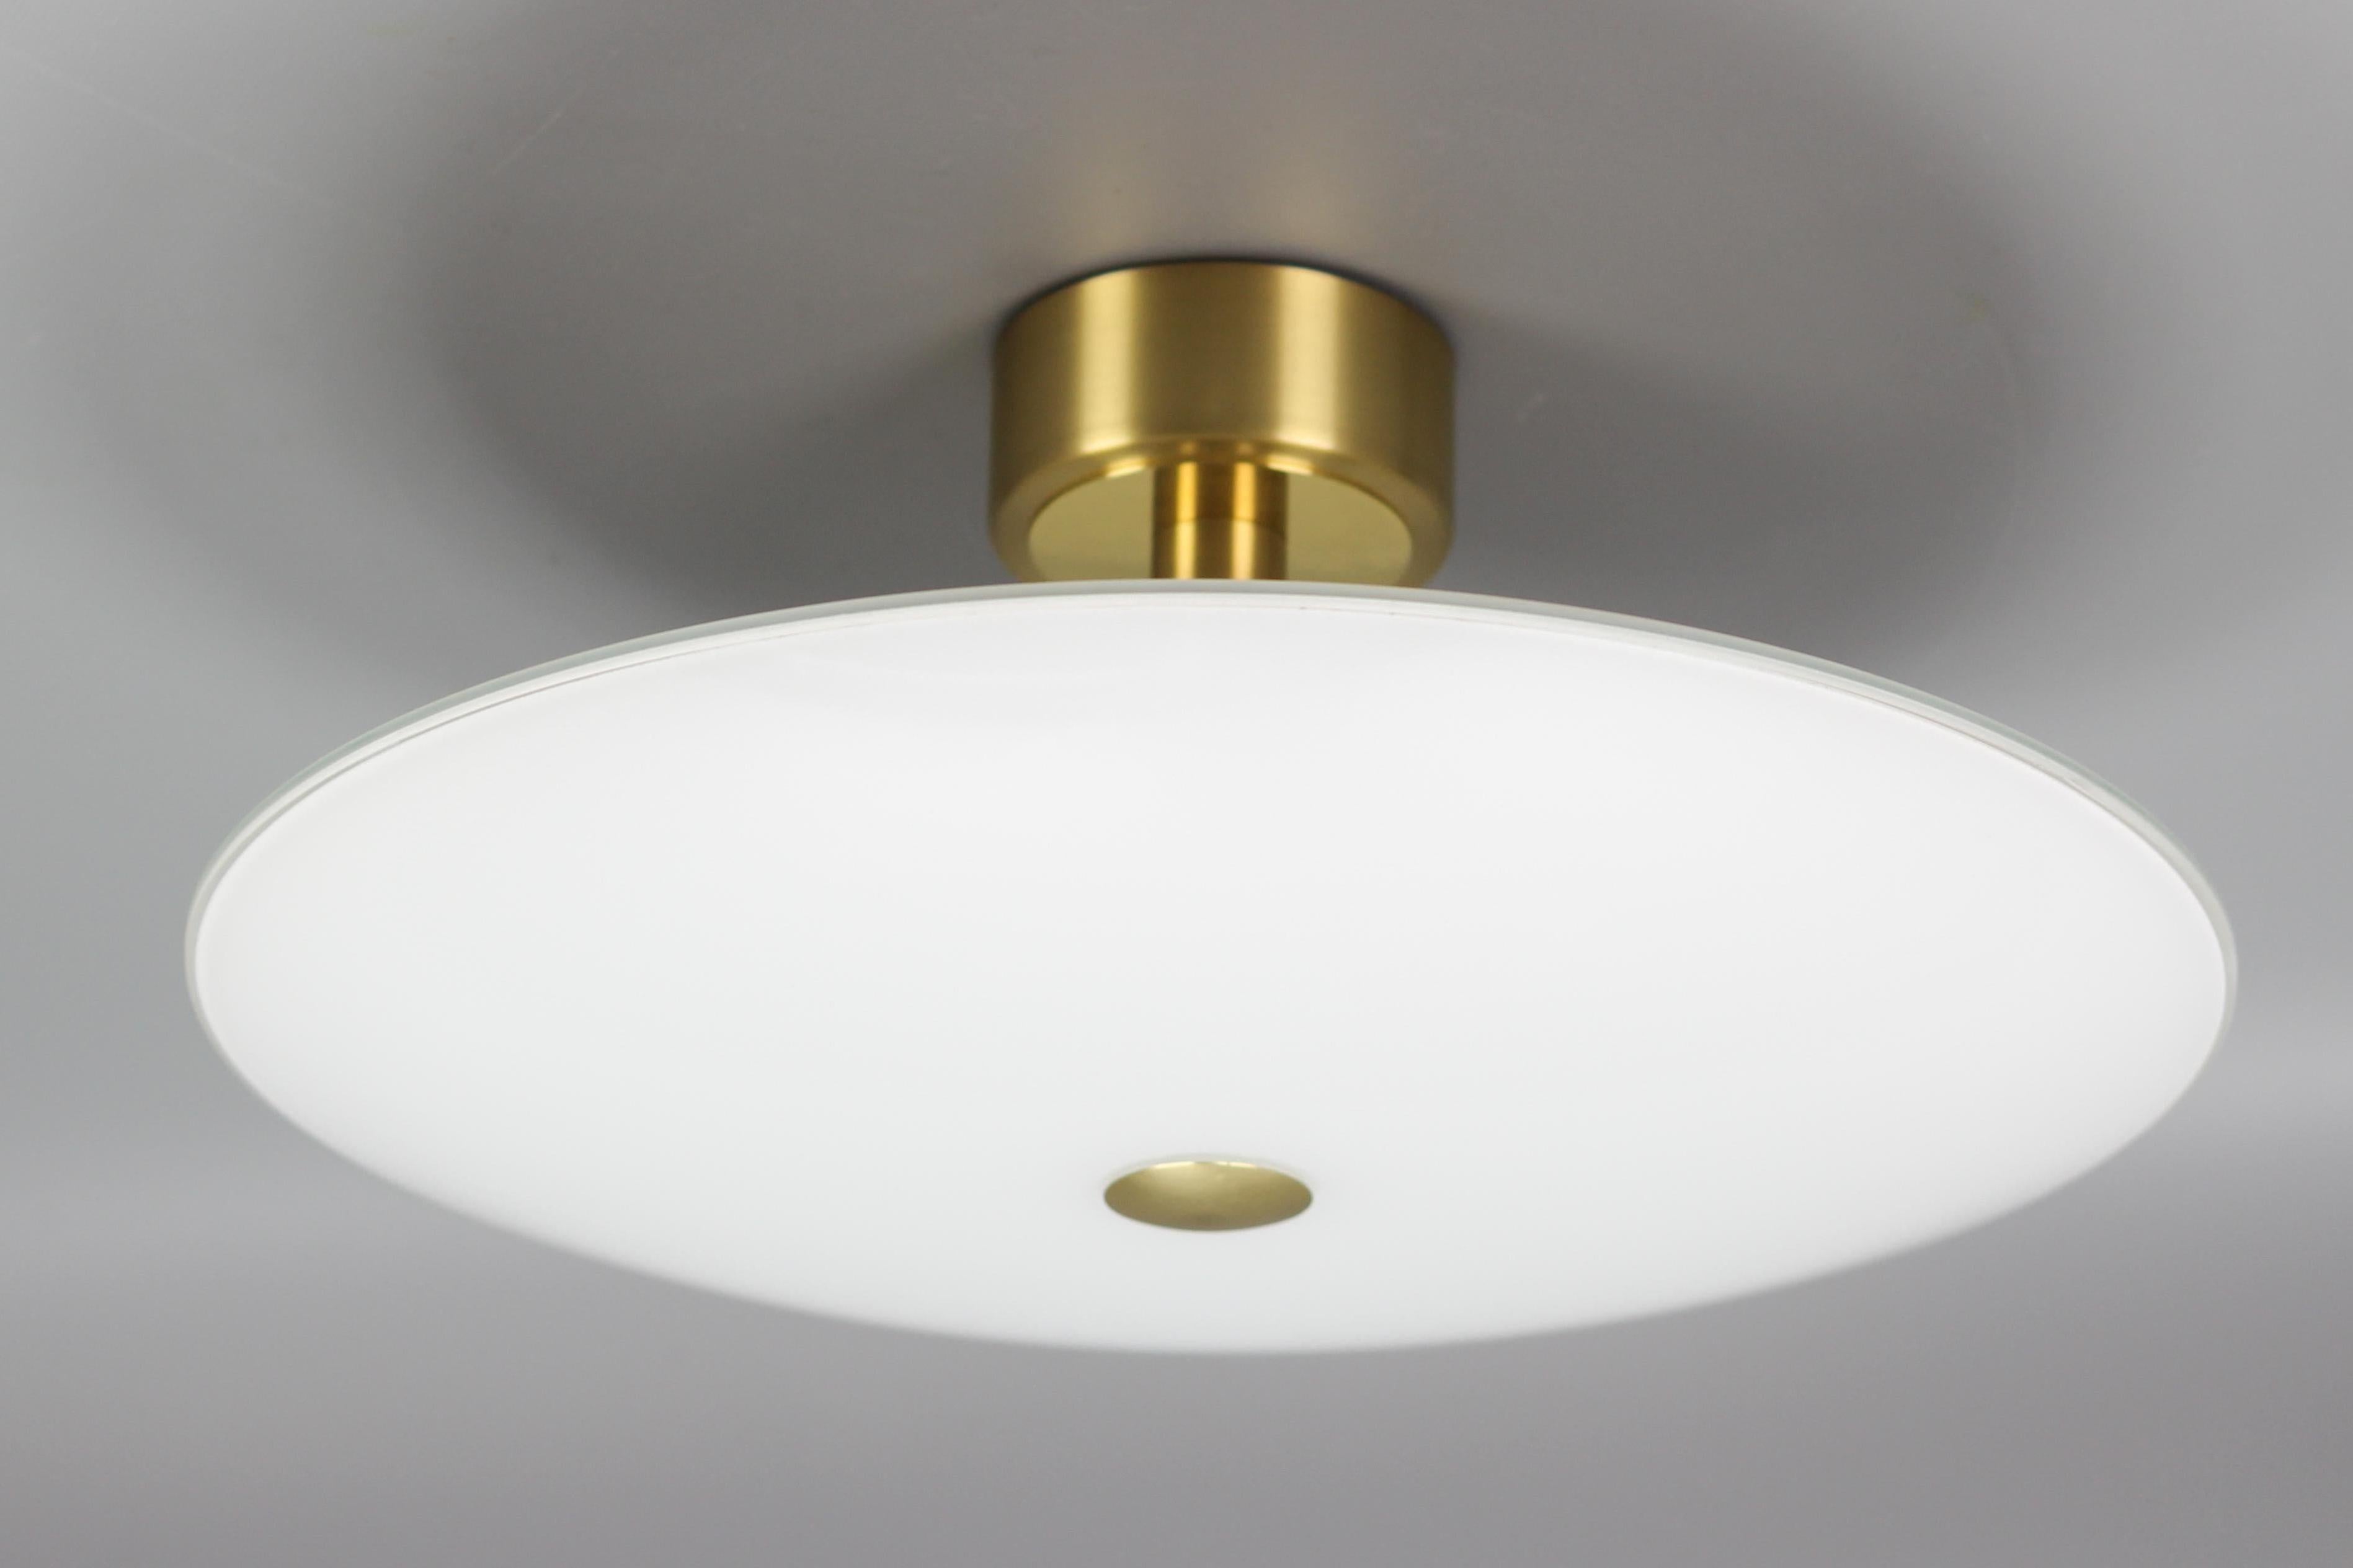 B + M Leuchten brass and white glass flush mount, Germany, circa 2015.
An elegant and beautifully shaped white glass and brass flush mount, made in Germany, with one socket for the B15d size light bulb.
Dimensions: height: 22 cm / 8.66 in; diameter: